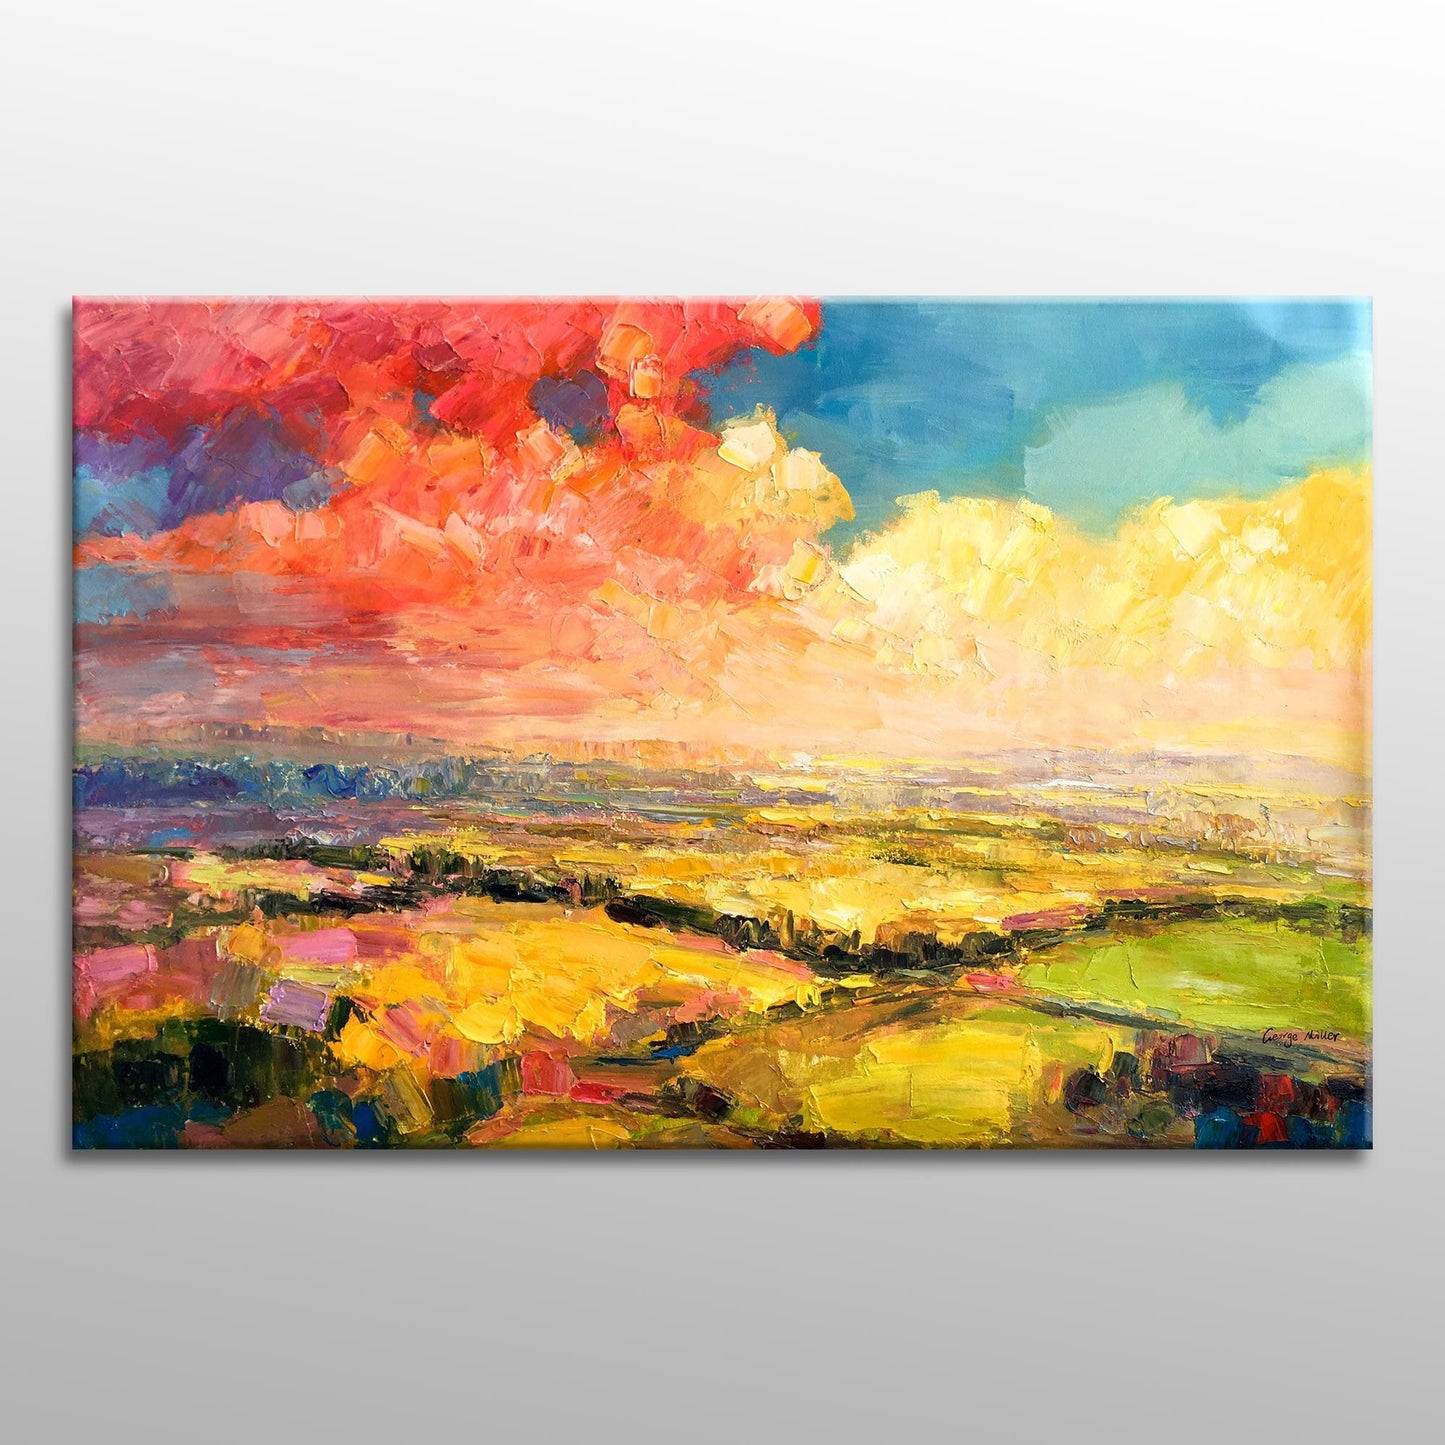 Large Art, Landscape Oil Painting Wall Hanging, Original Landscape Painting, Abstract Canvas Painting, Modern Abstract Landscape Painting